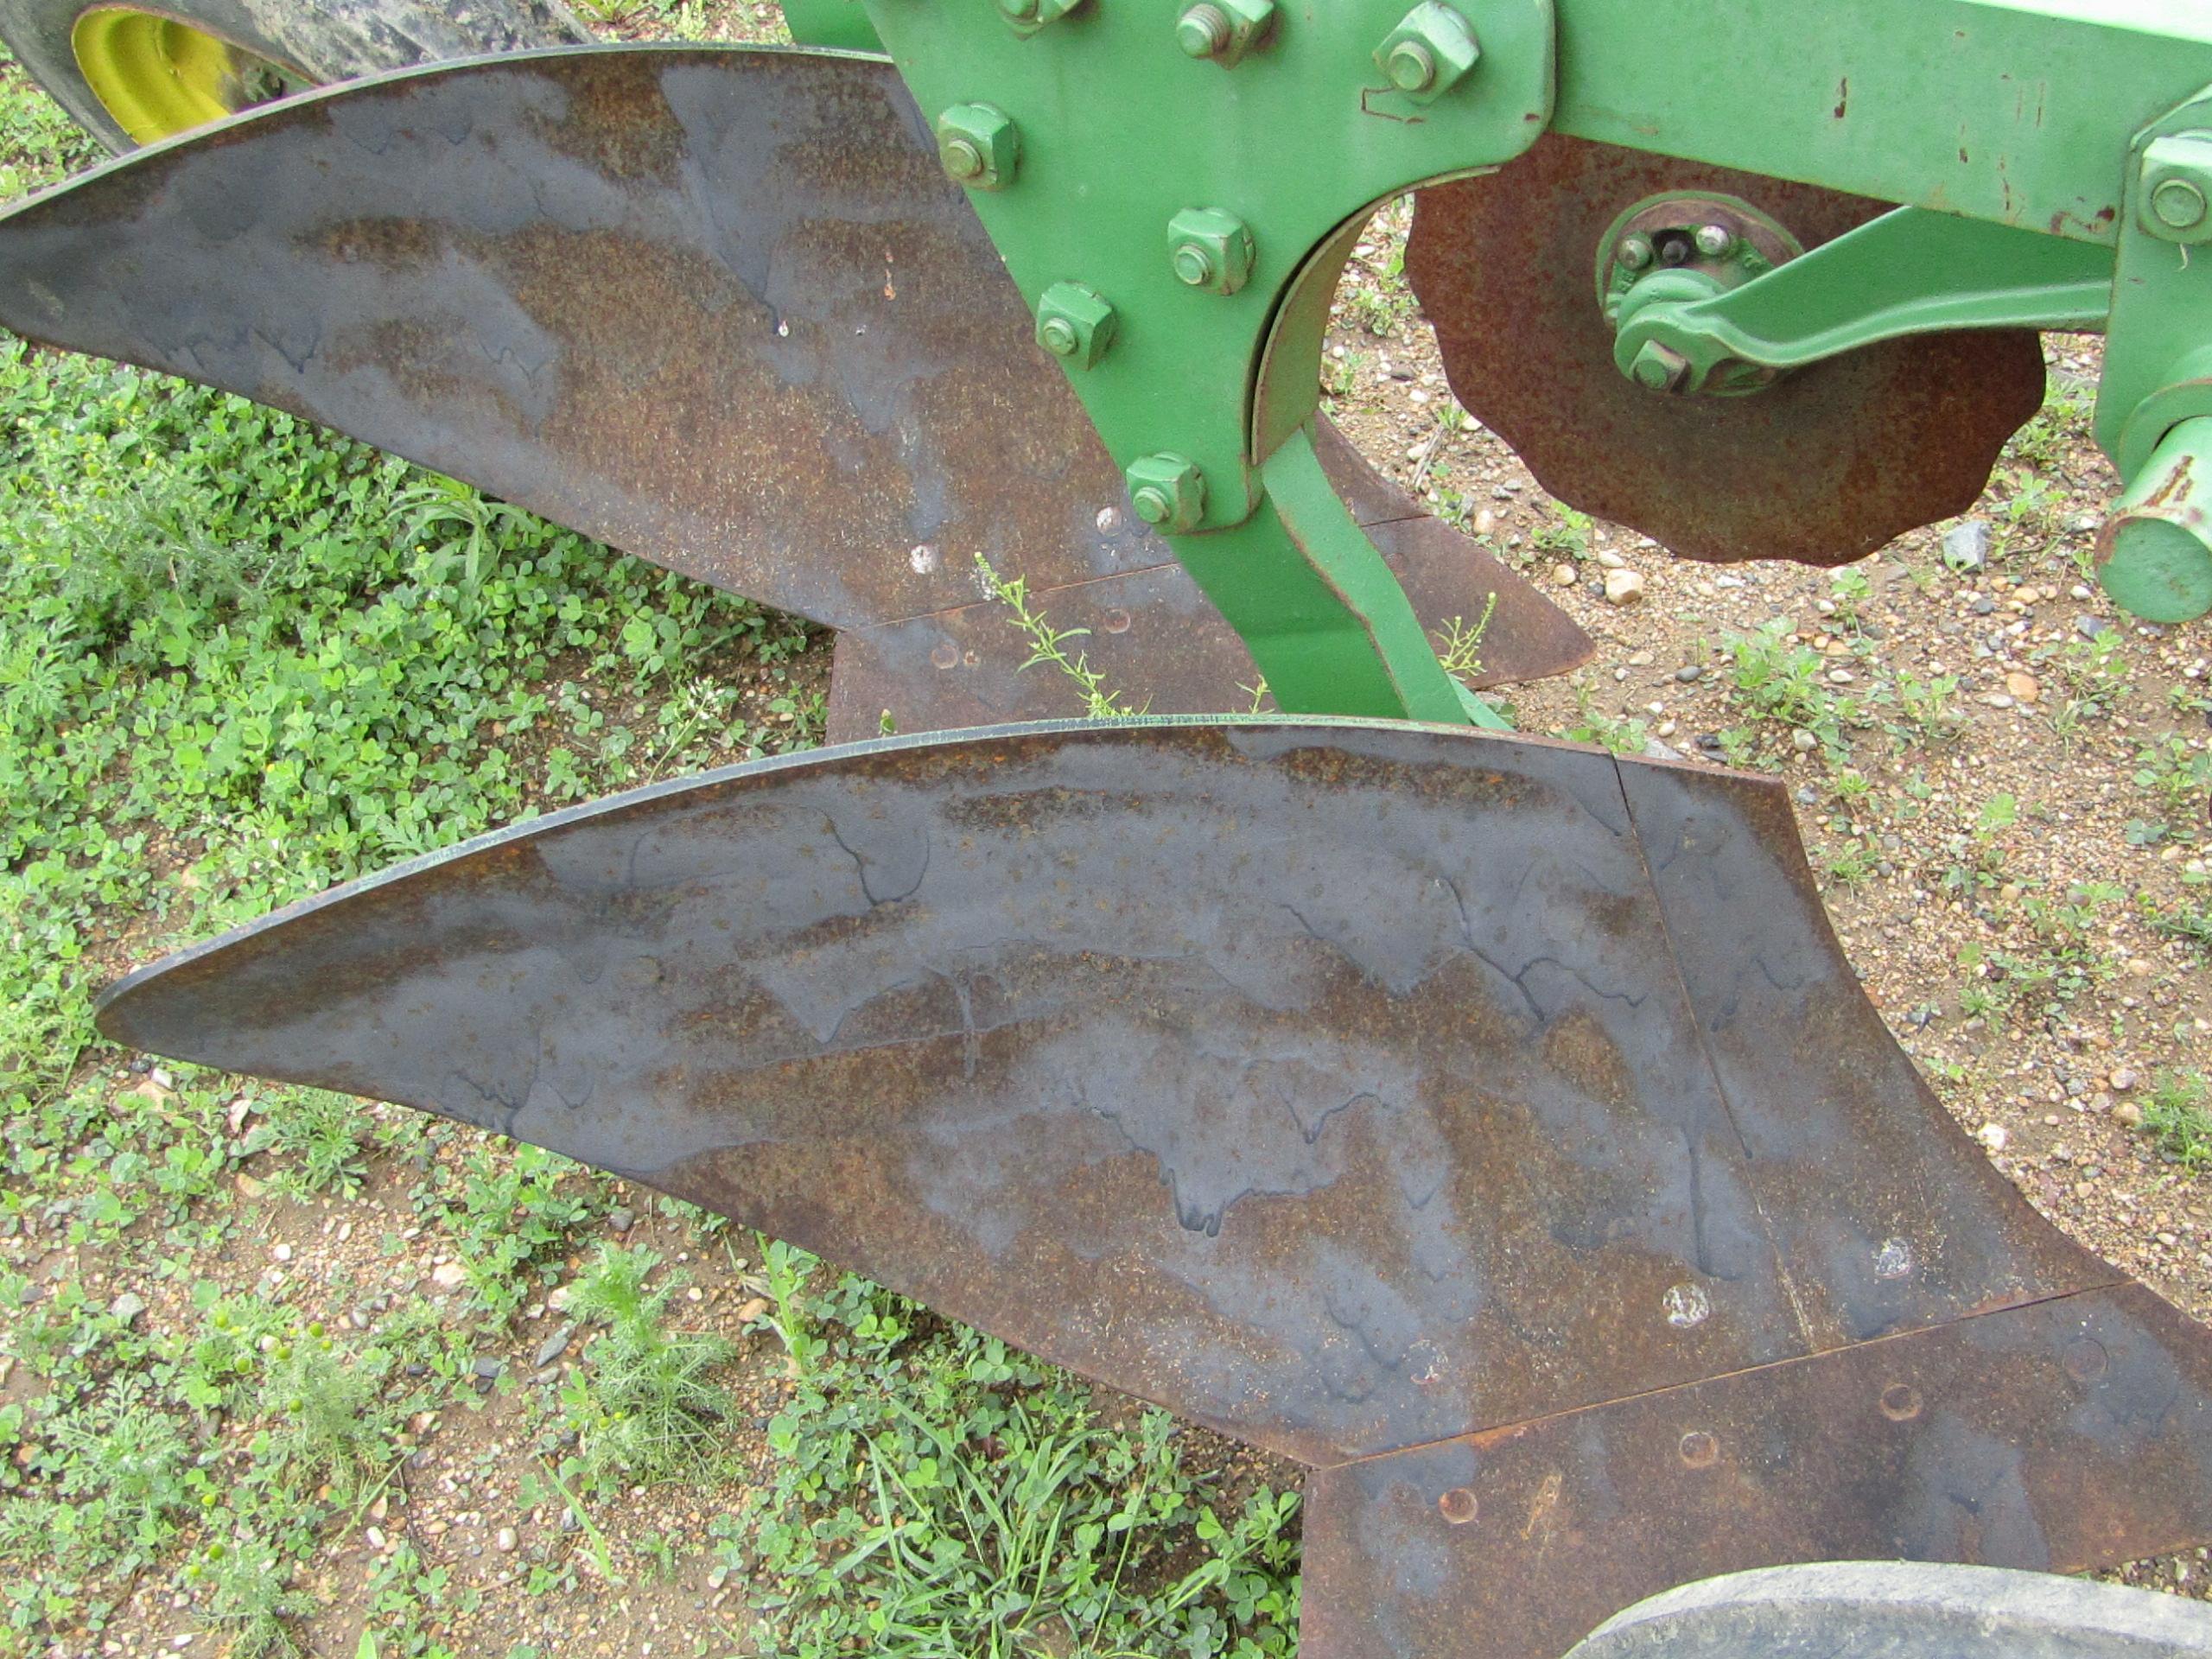 John Deere Model 44 2 X 14 Inch Ground Lift Plow, Purchased New by Norm’s F